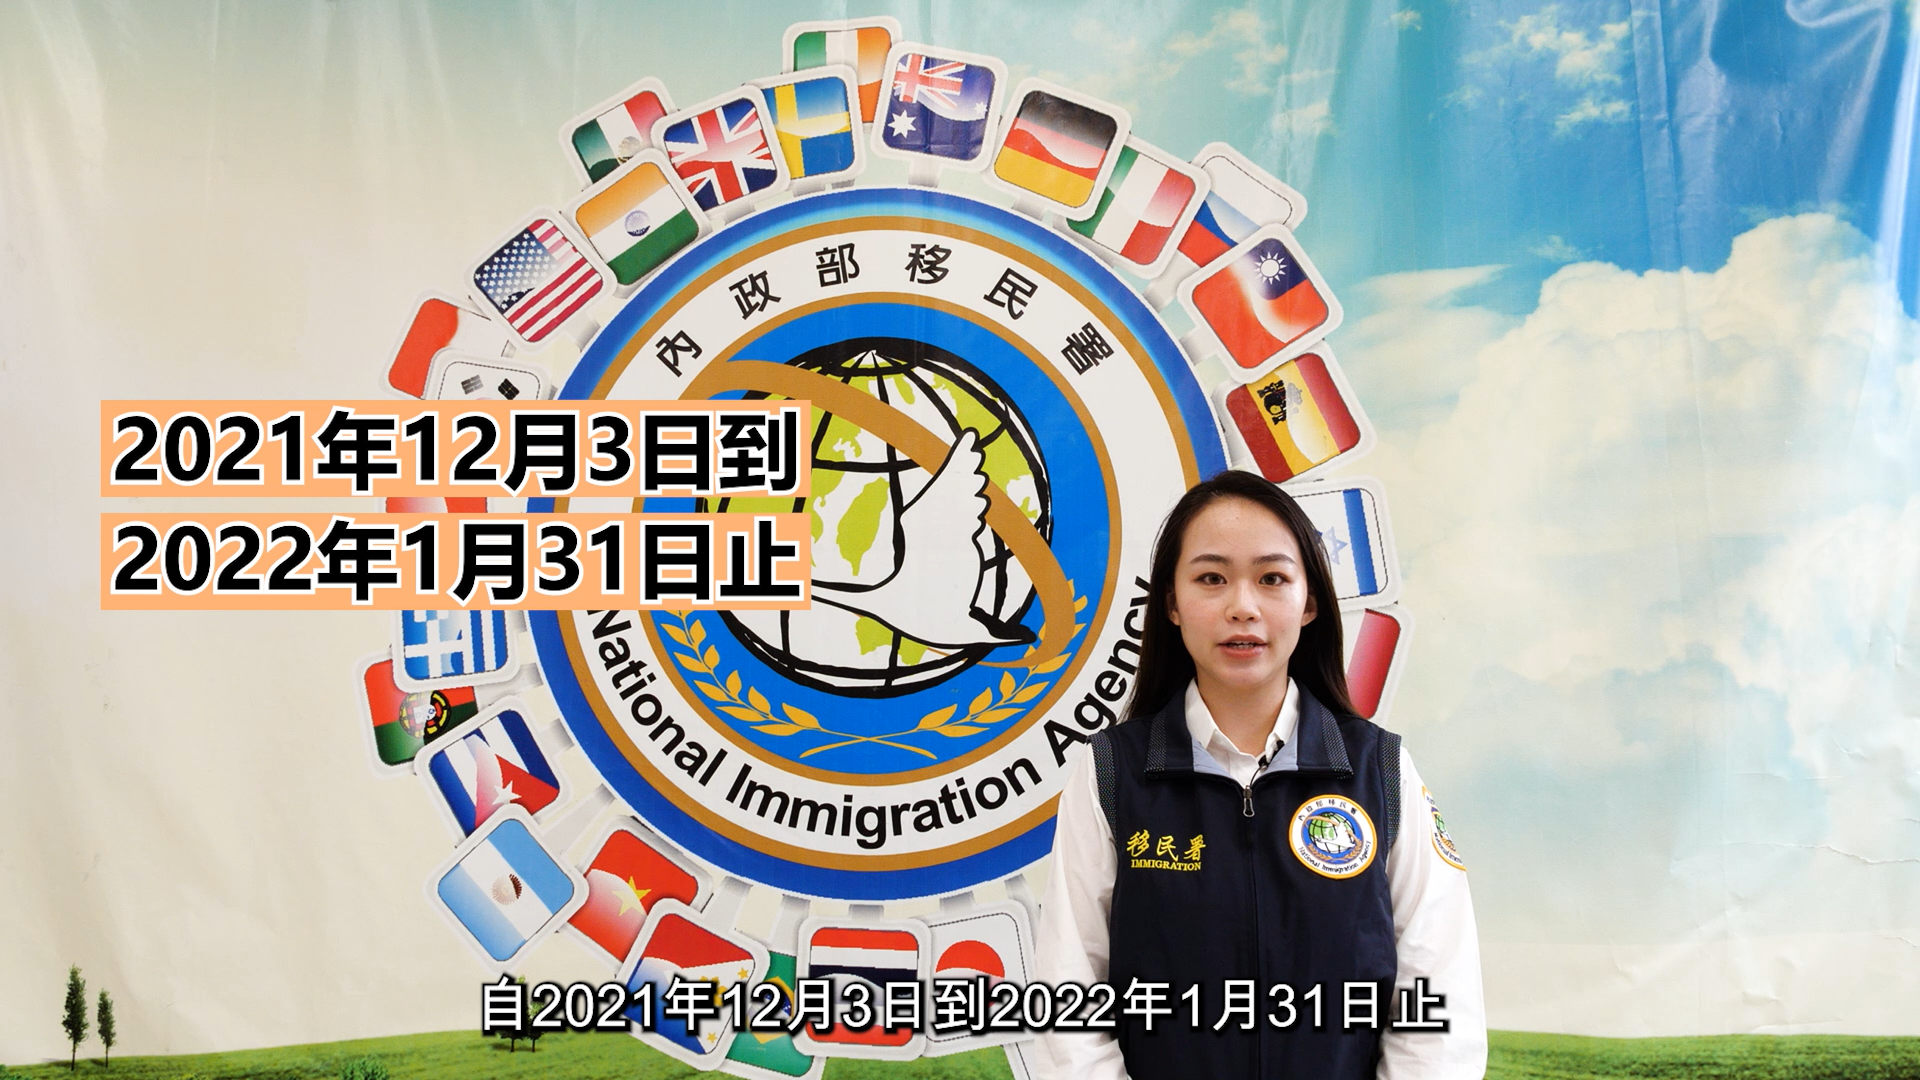 NIA promotes the “Carefree Covid-19 Vaccination Program” in multiple languages. (Photo / Provided by NIA)